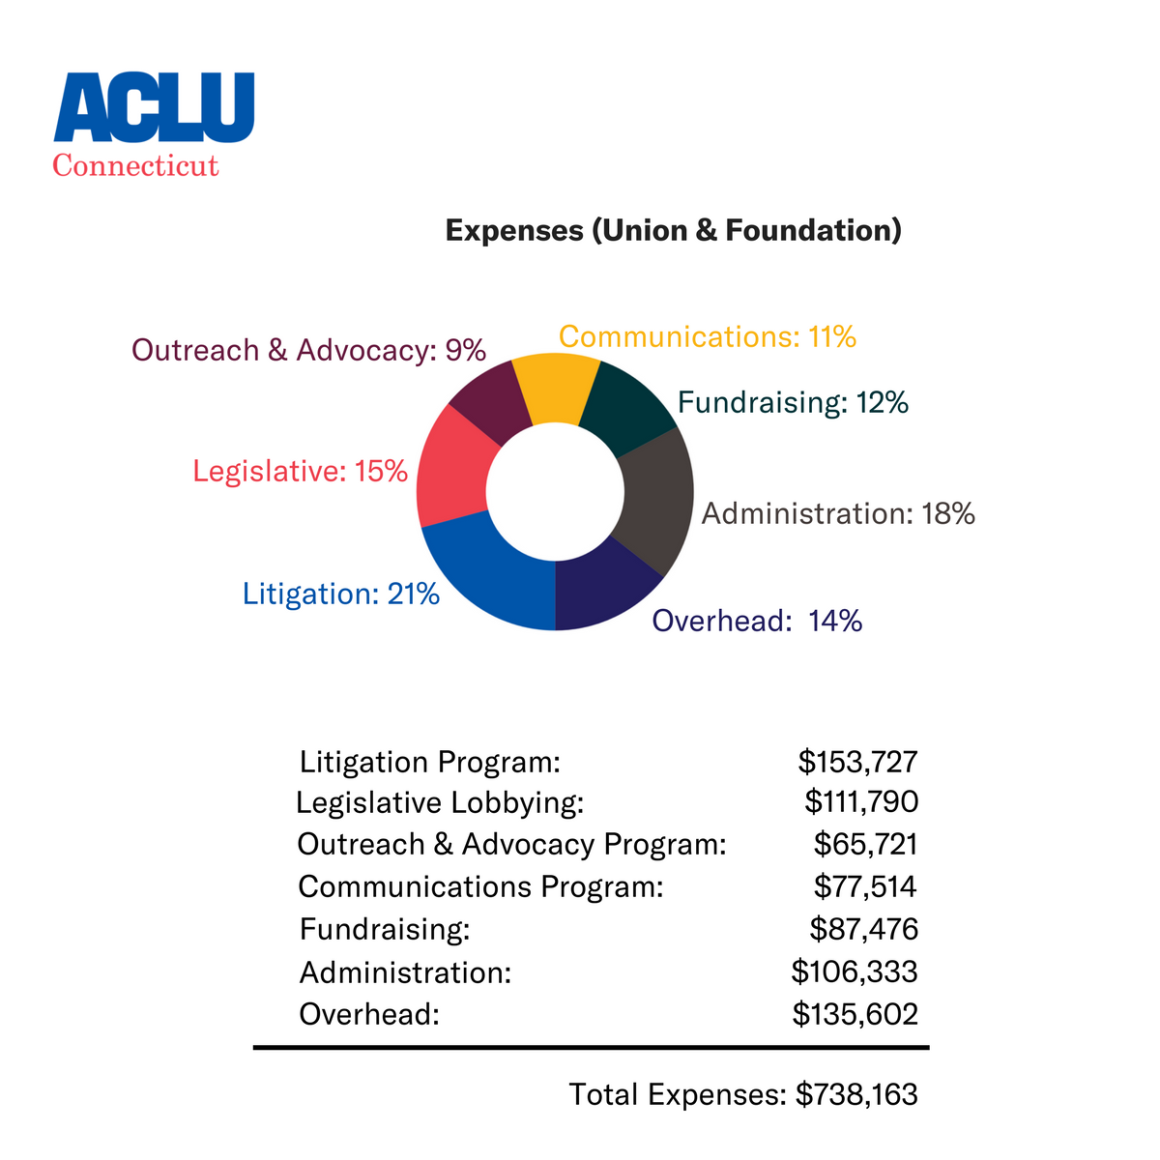 Expenses for the ACLU-CT in 2017